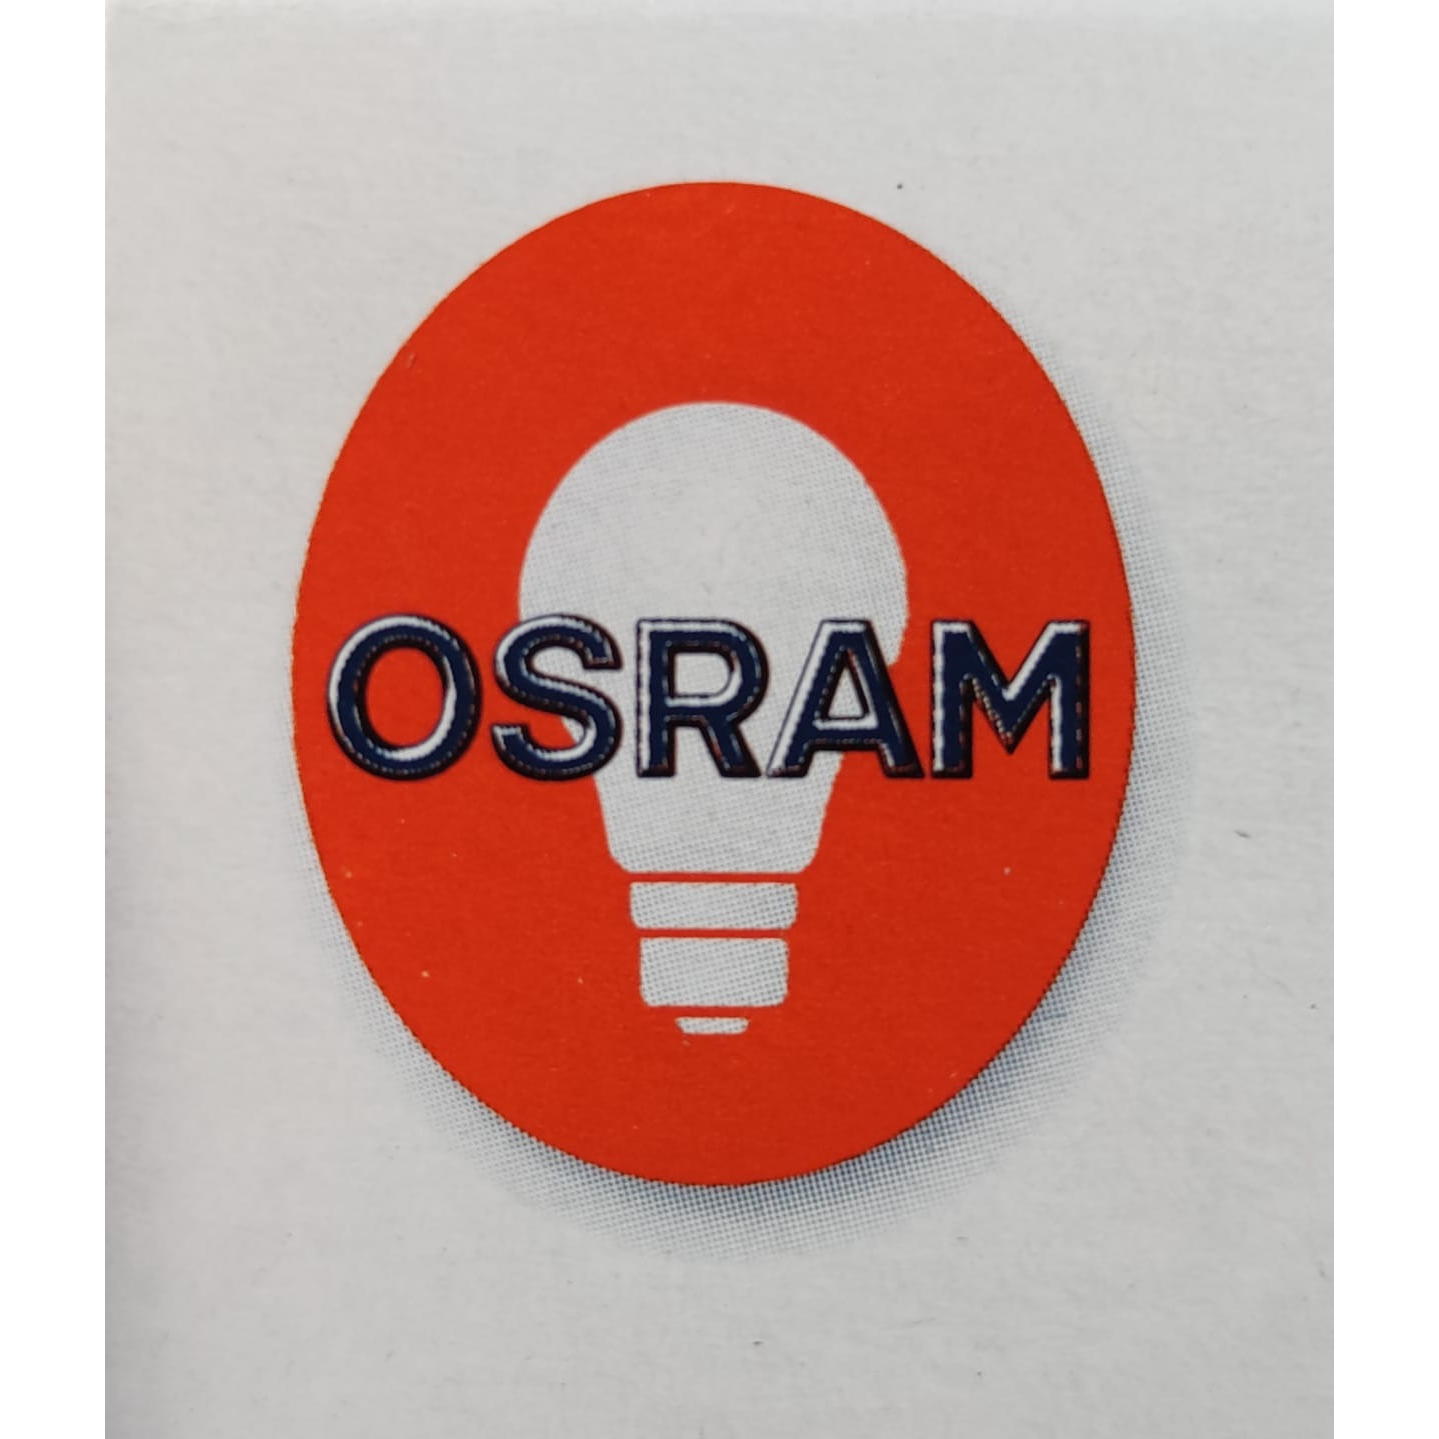 Osram 008899 Ampoule Tube G5 6w 270lm - 4200k Blanc Froid 3